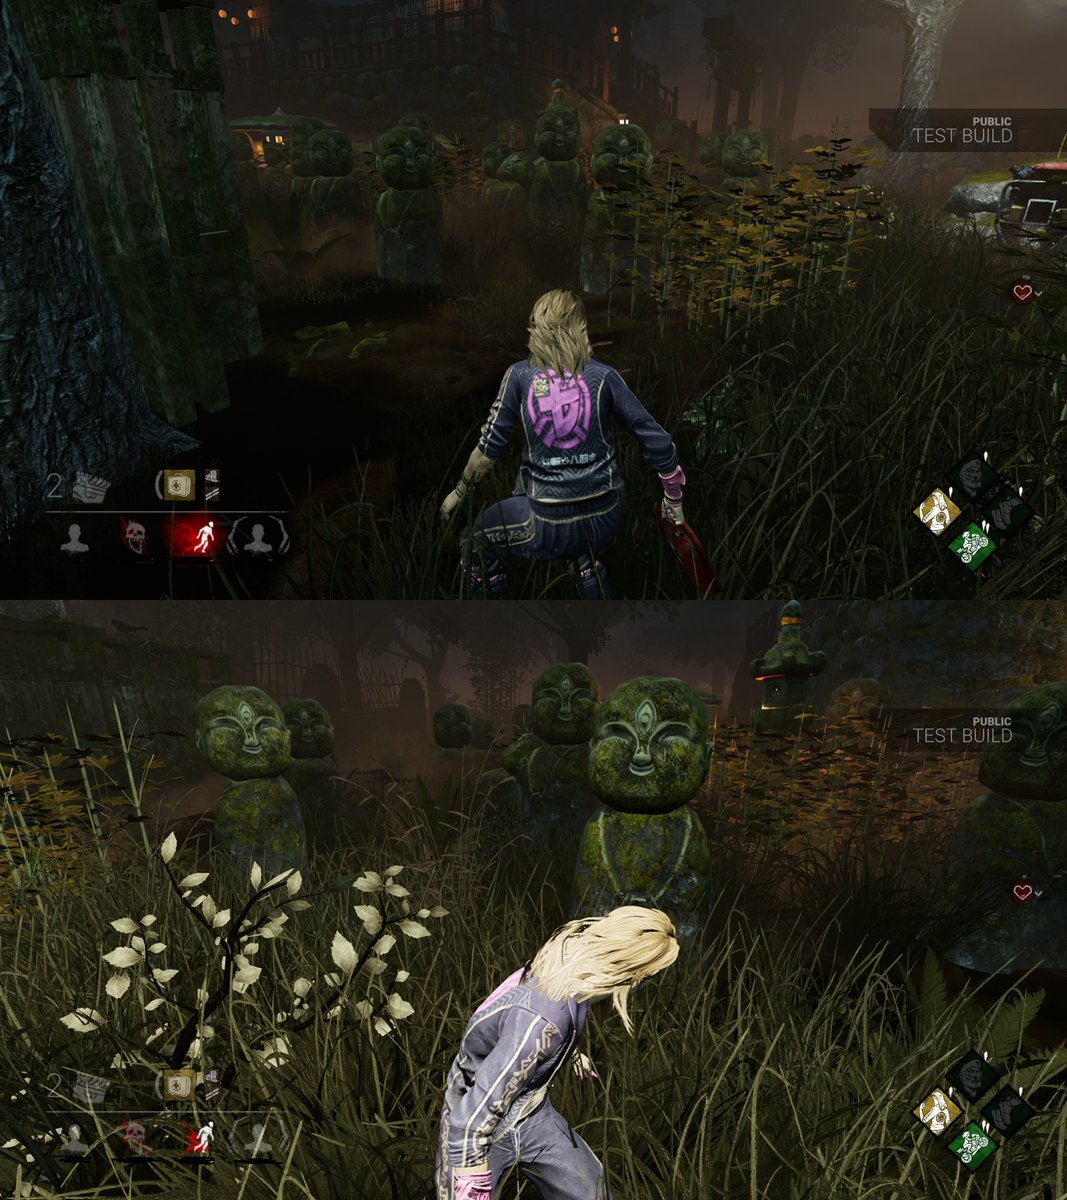 Leaksbydaylight Dead By Daylight Leaks News Did You Notice The Easteregg In The New Map If You Look Away And Then Look Back At The Statues They